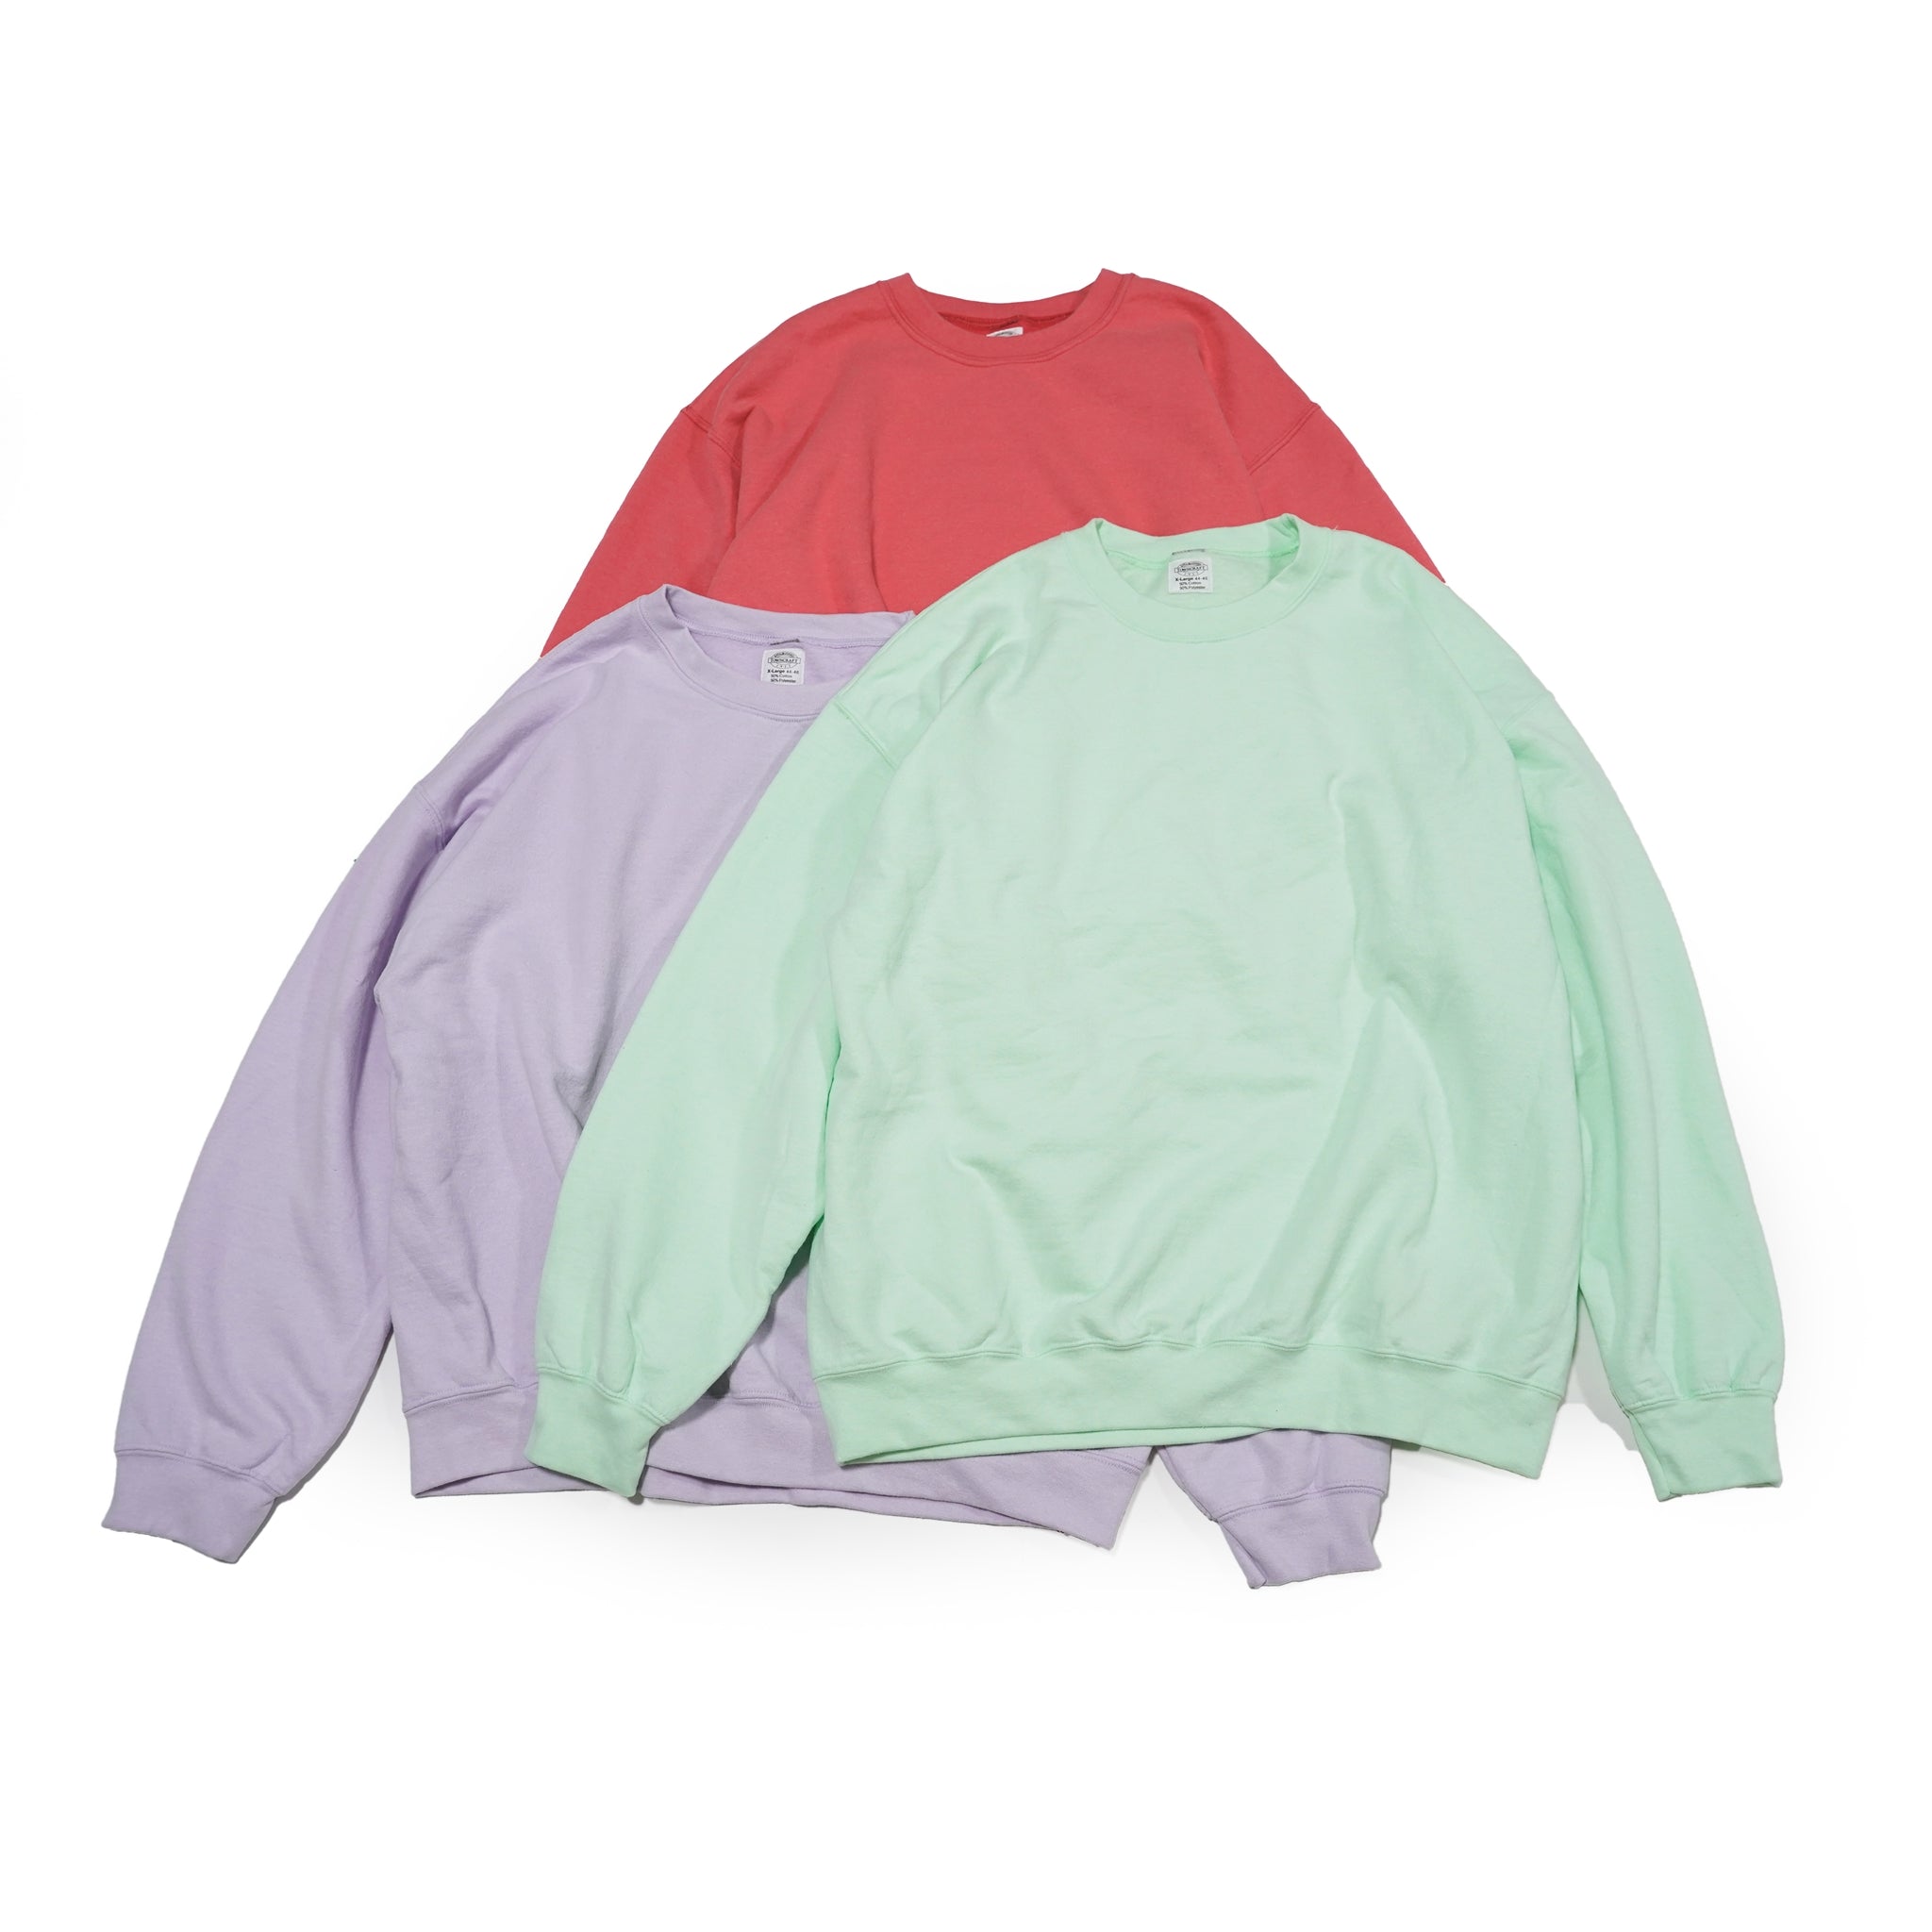 No:tc17f028 | Name:80S Crew Sweat | Color:Light Purplr/S Red/Mint Green  | Size:L/XL【TOWNCRAFT_タウンクラフト】